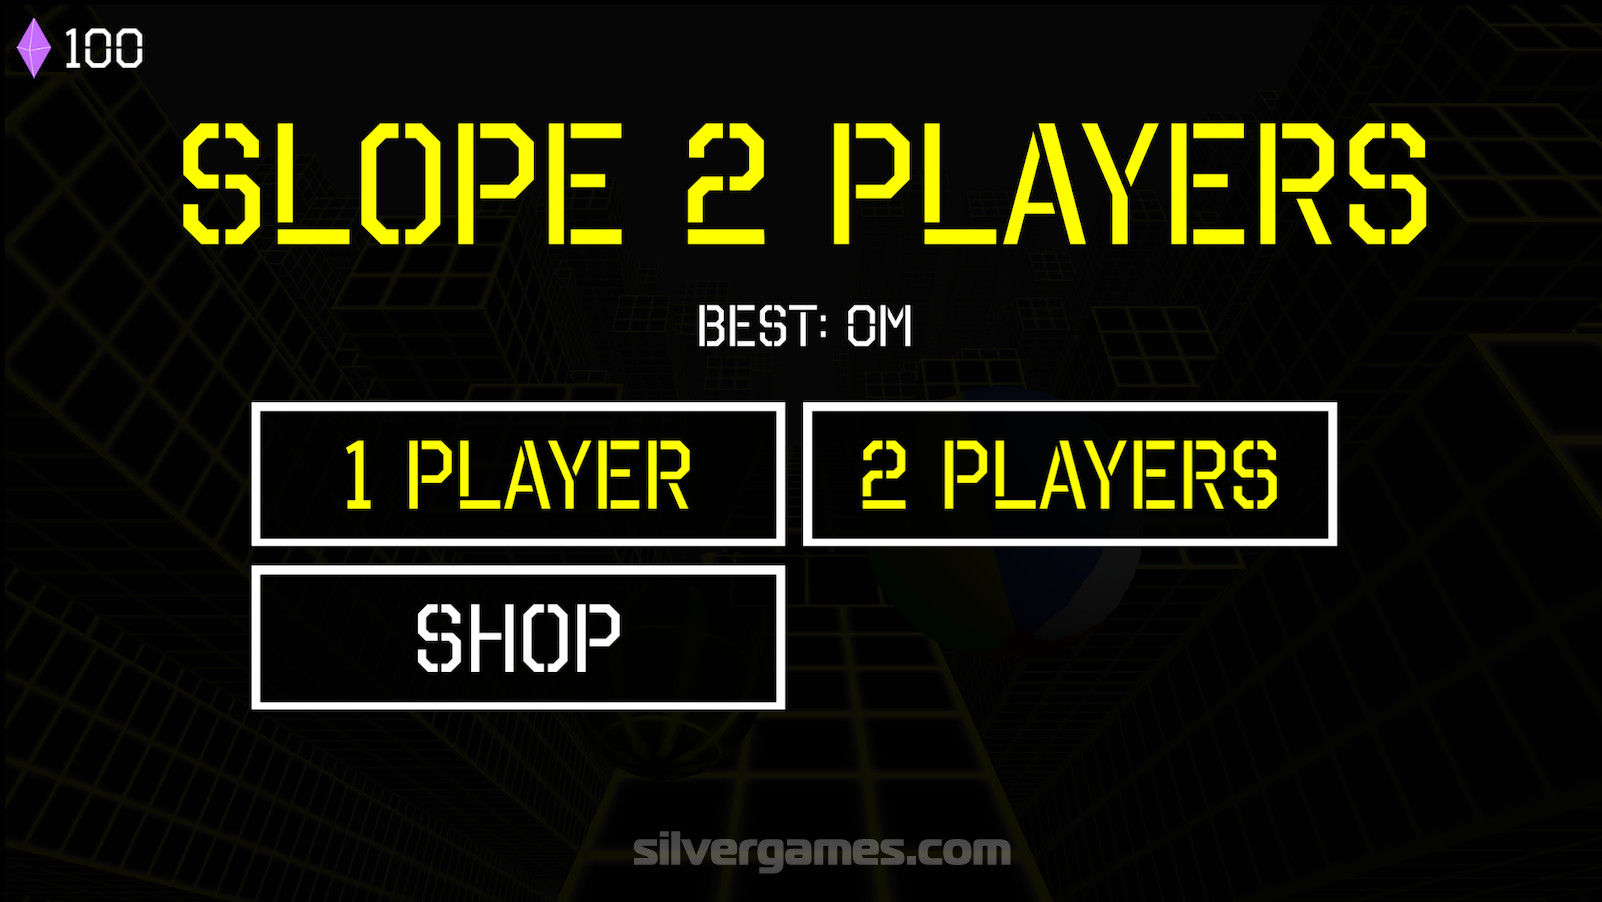 Slope 2 Player